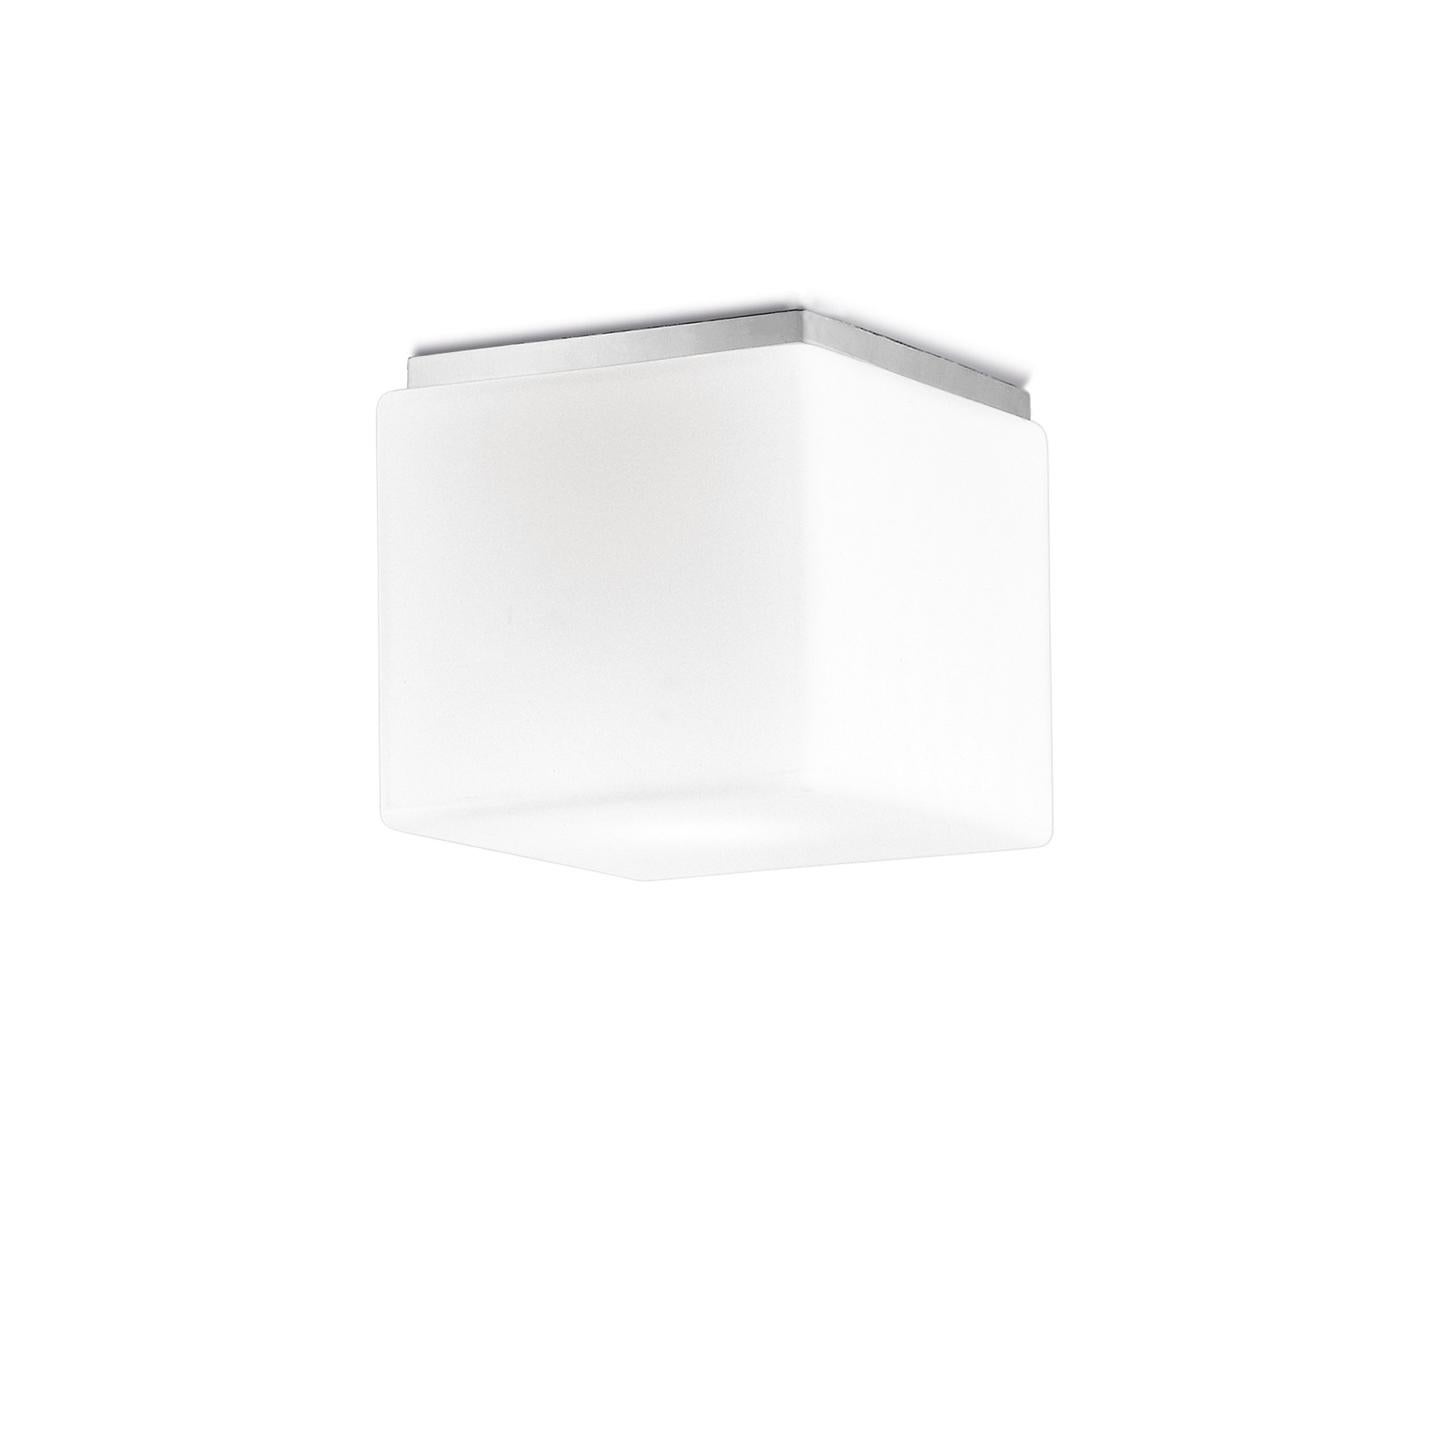 The Cubi Ceiling/Wall Lamp, designed in 2000, is an icon of Leucos. Its cubic form is surprising for handmade glass, which makes it a delightful lamp. Its hand-blown satin white diffuser is made of multiple layers of glass to create a rich, white